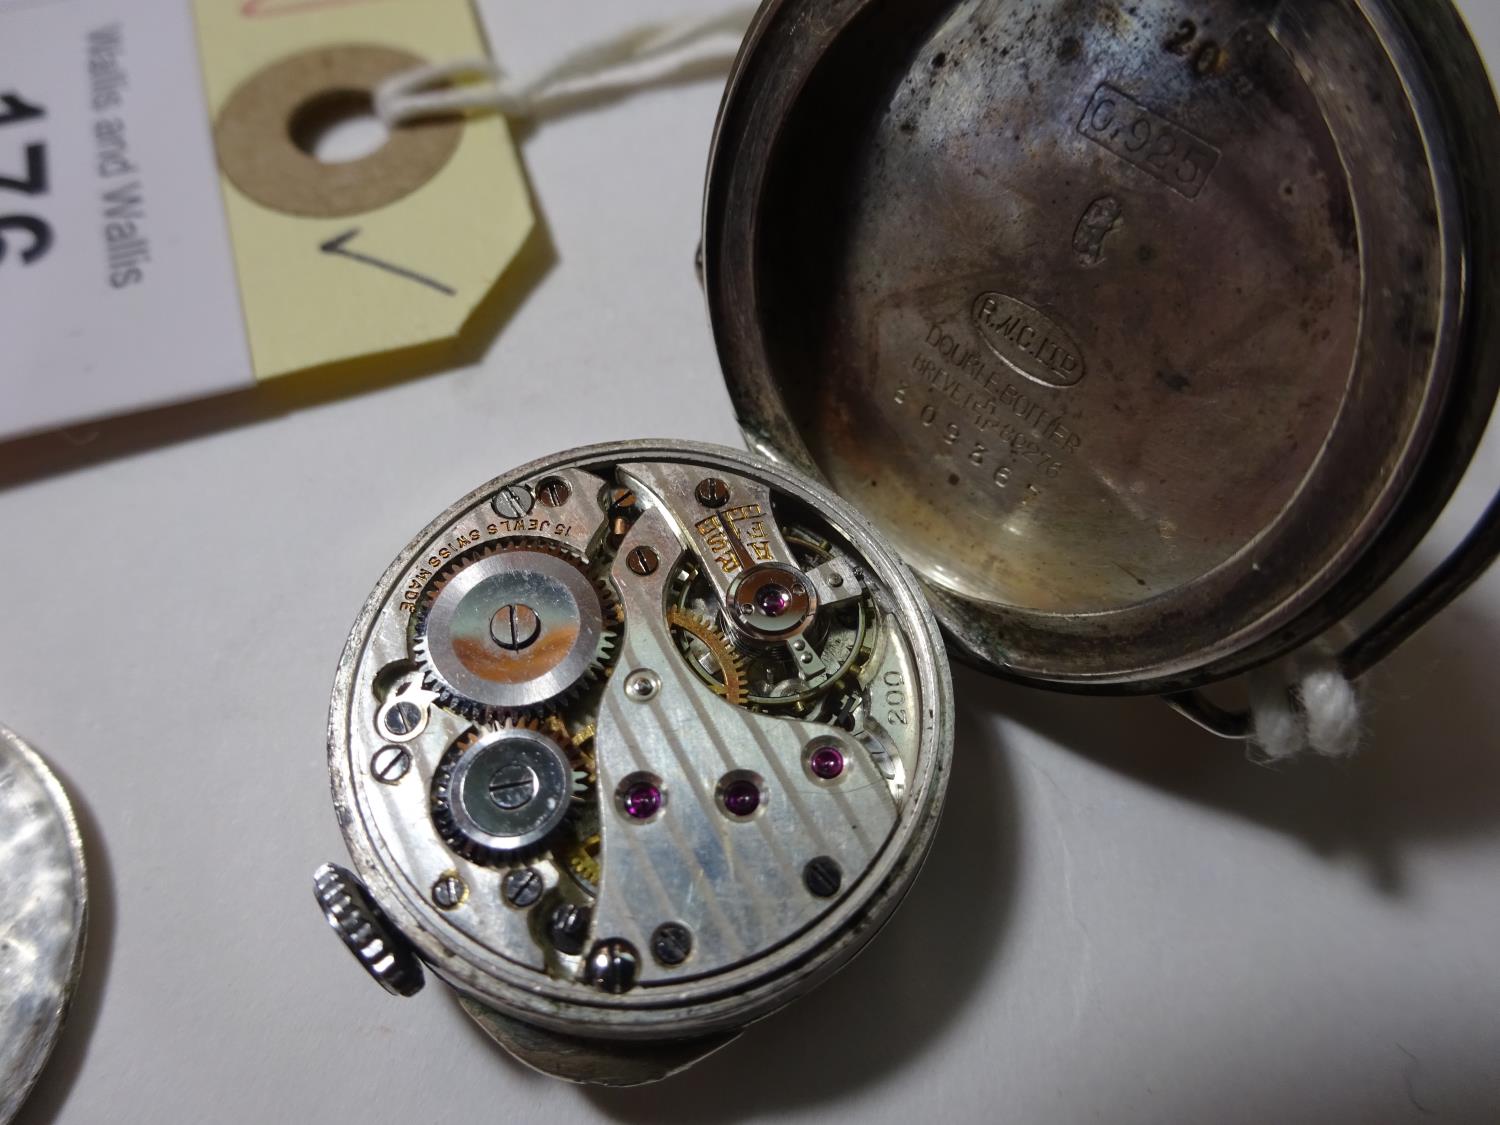 A Rolex Unicorn watch with manual wind movement and screw-off outer case. An early 20th Century - Image 4 of 5